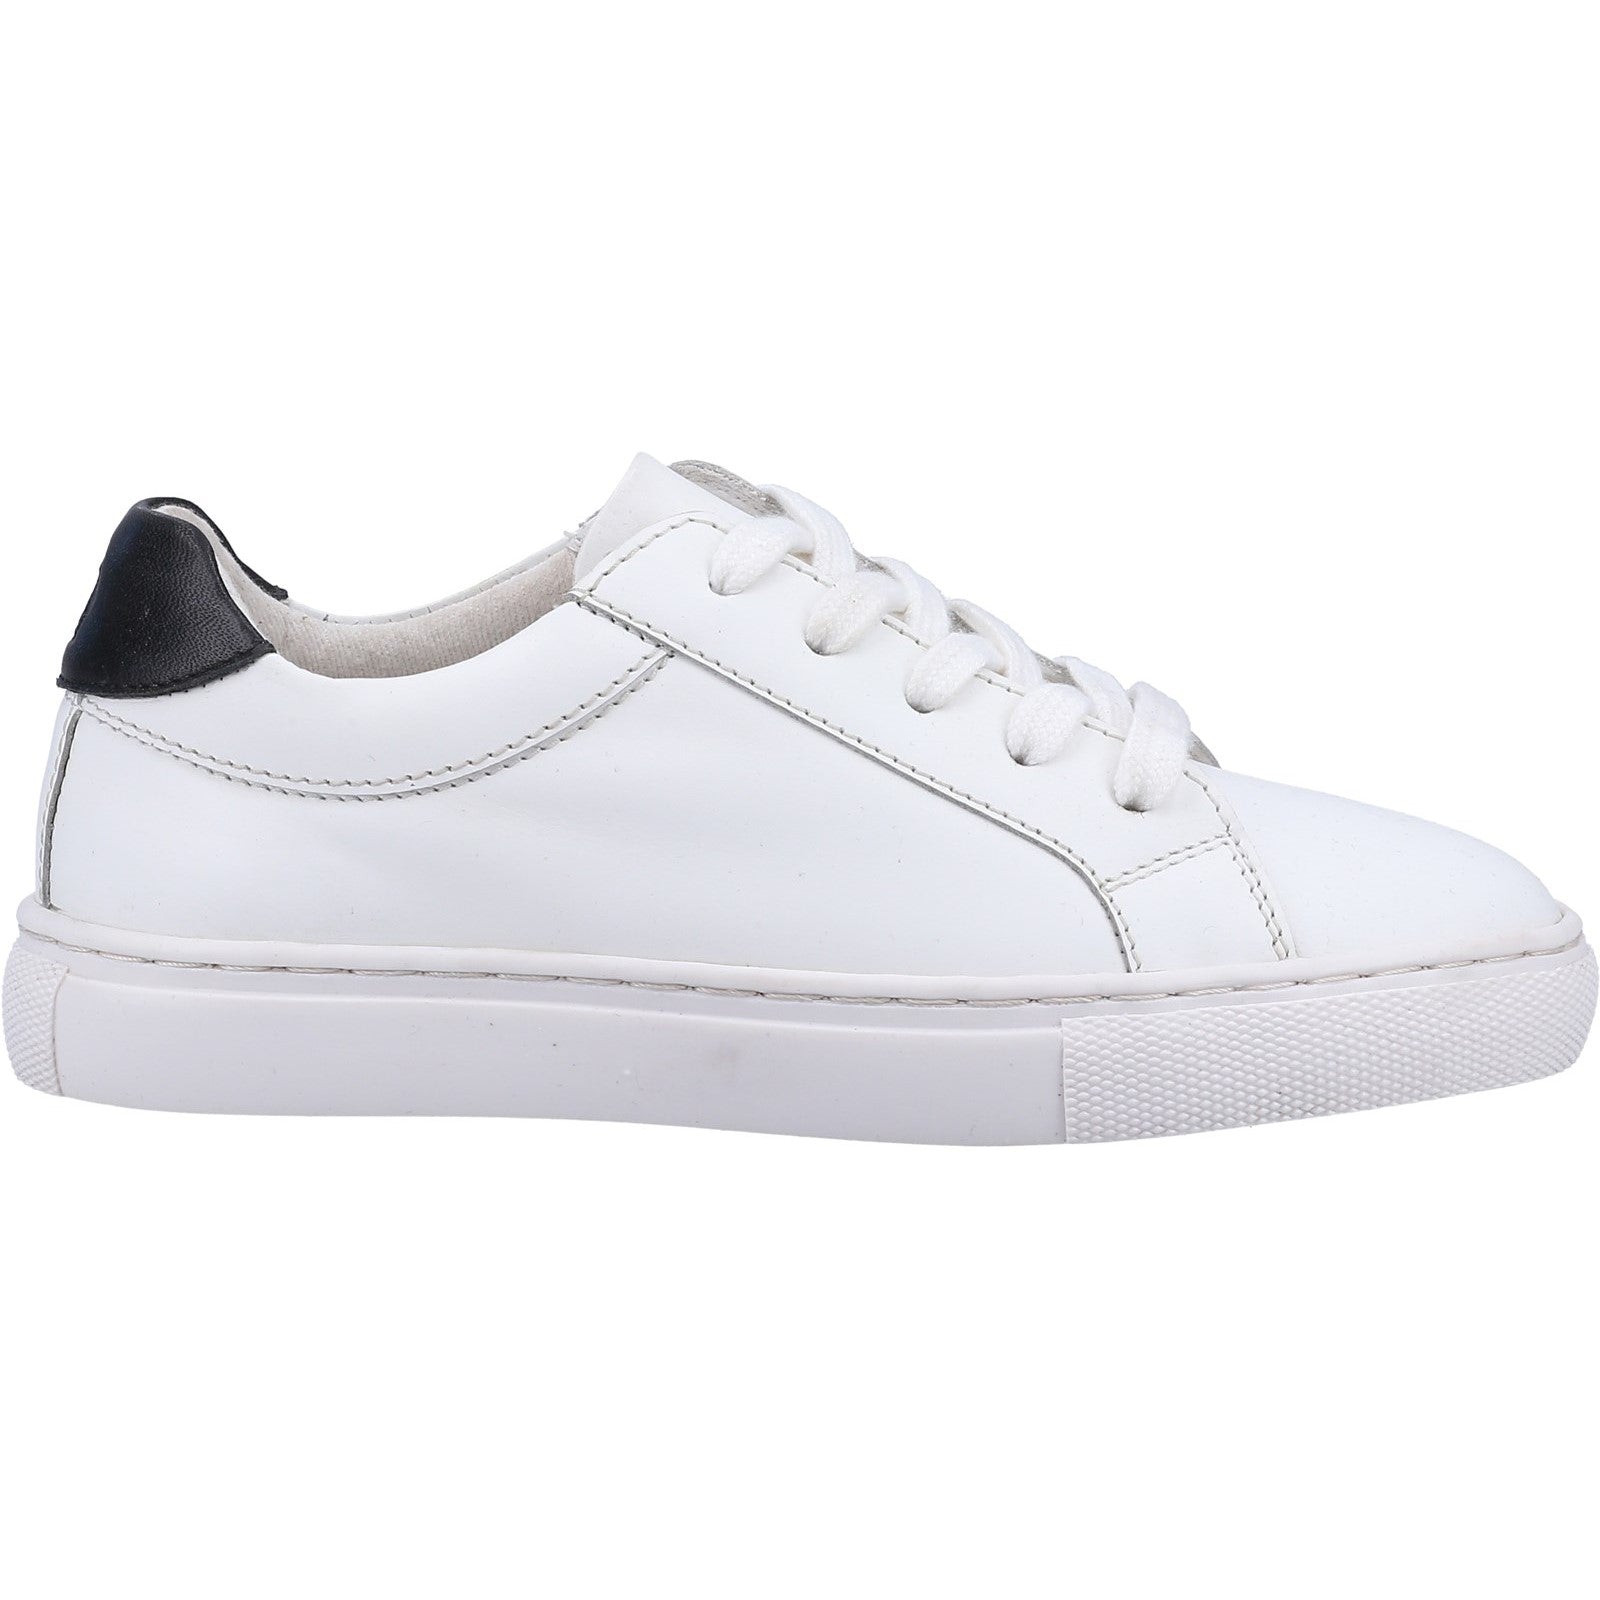 Hush Puppies Boys Colton Leather Trainers - White